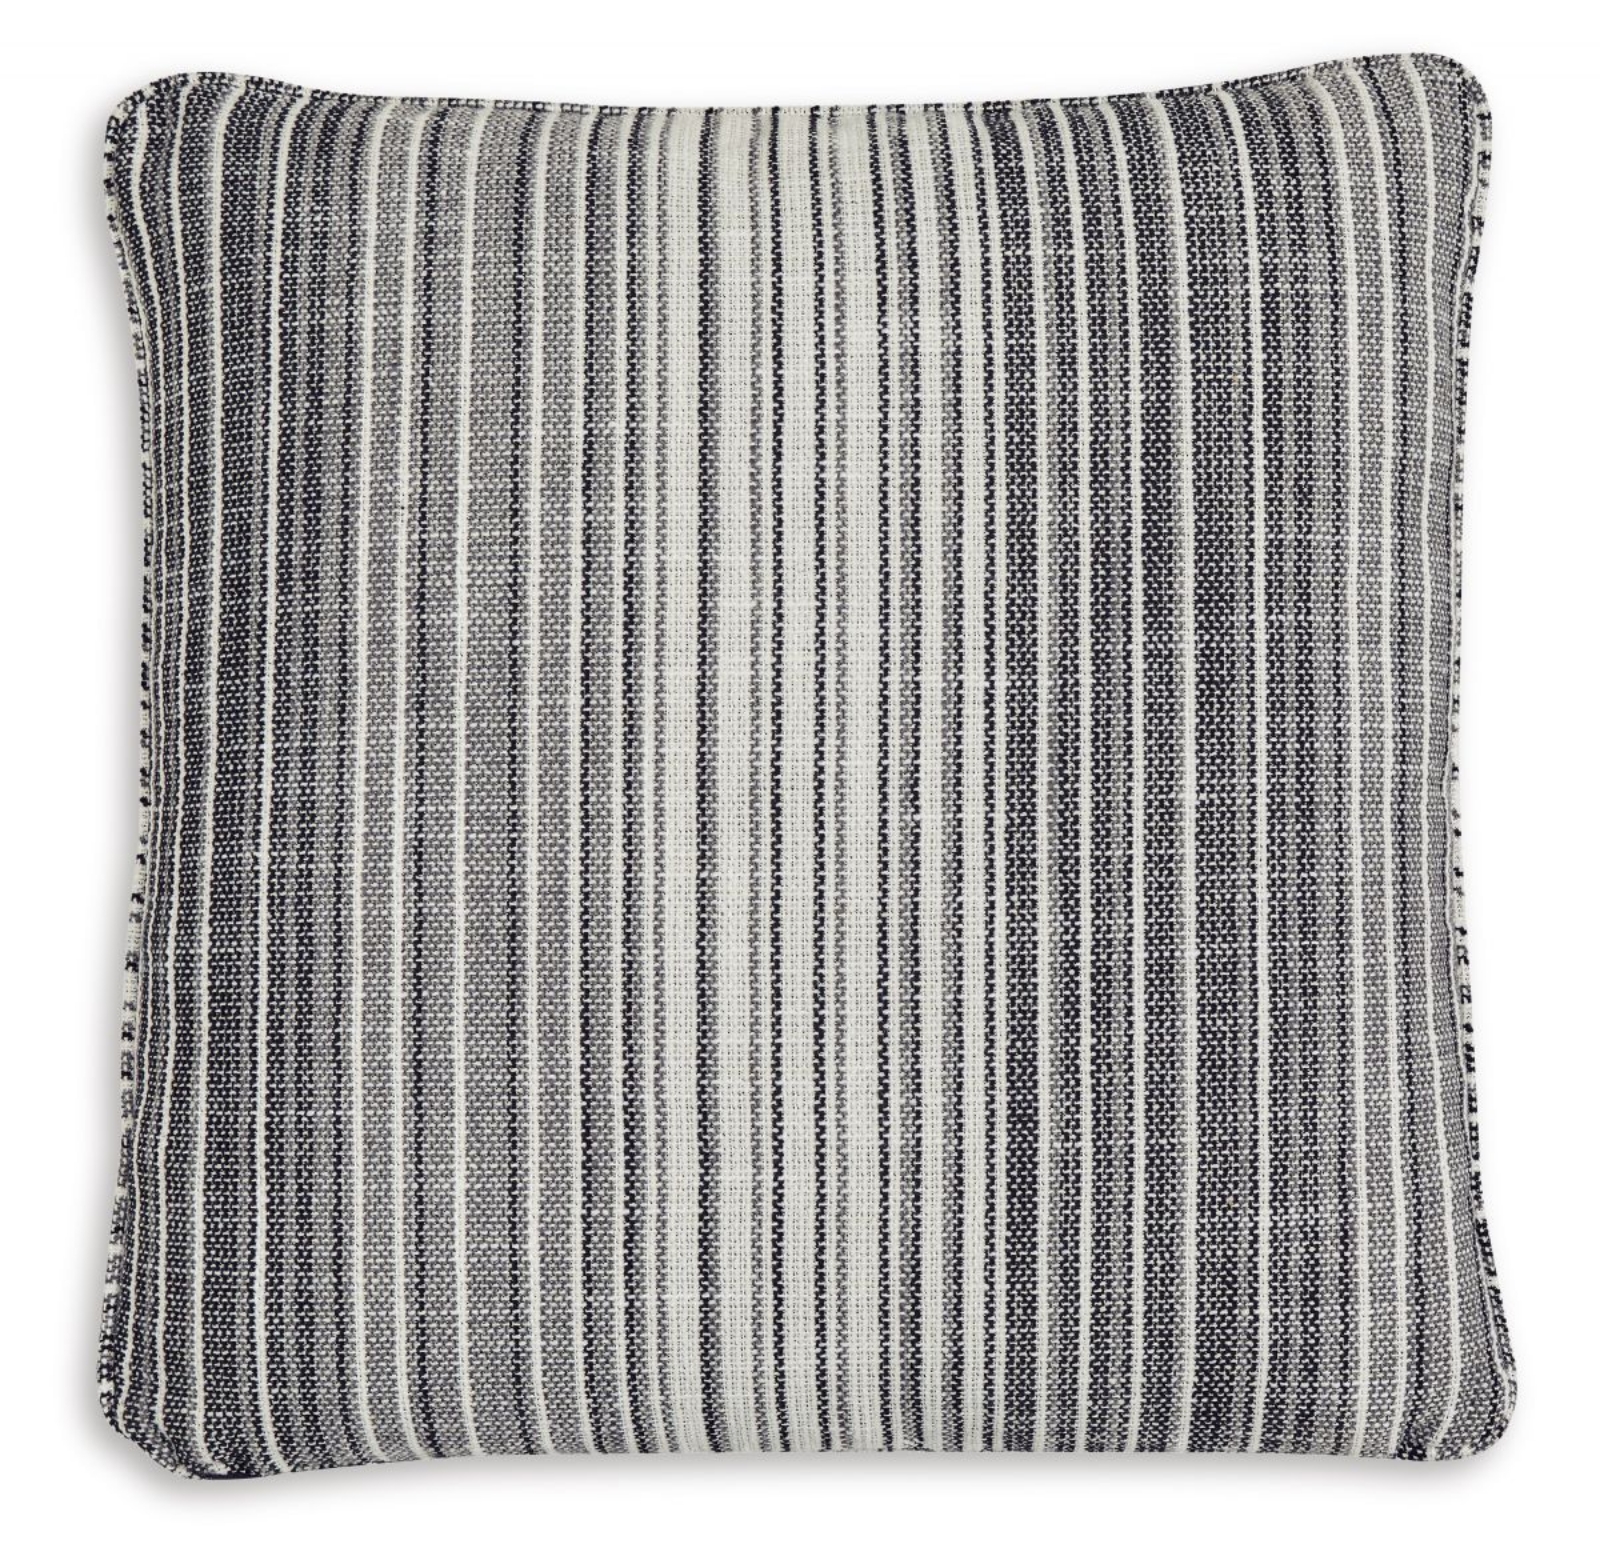 Picture of Chadby Next-Gen Nuvella Accent Pillow